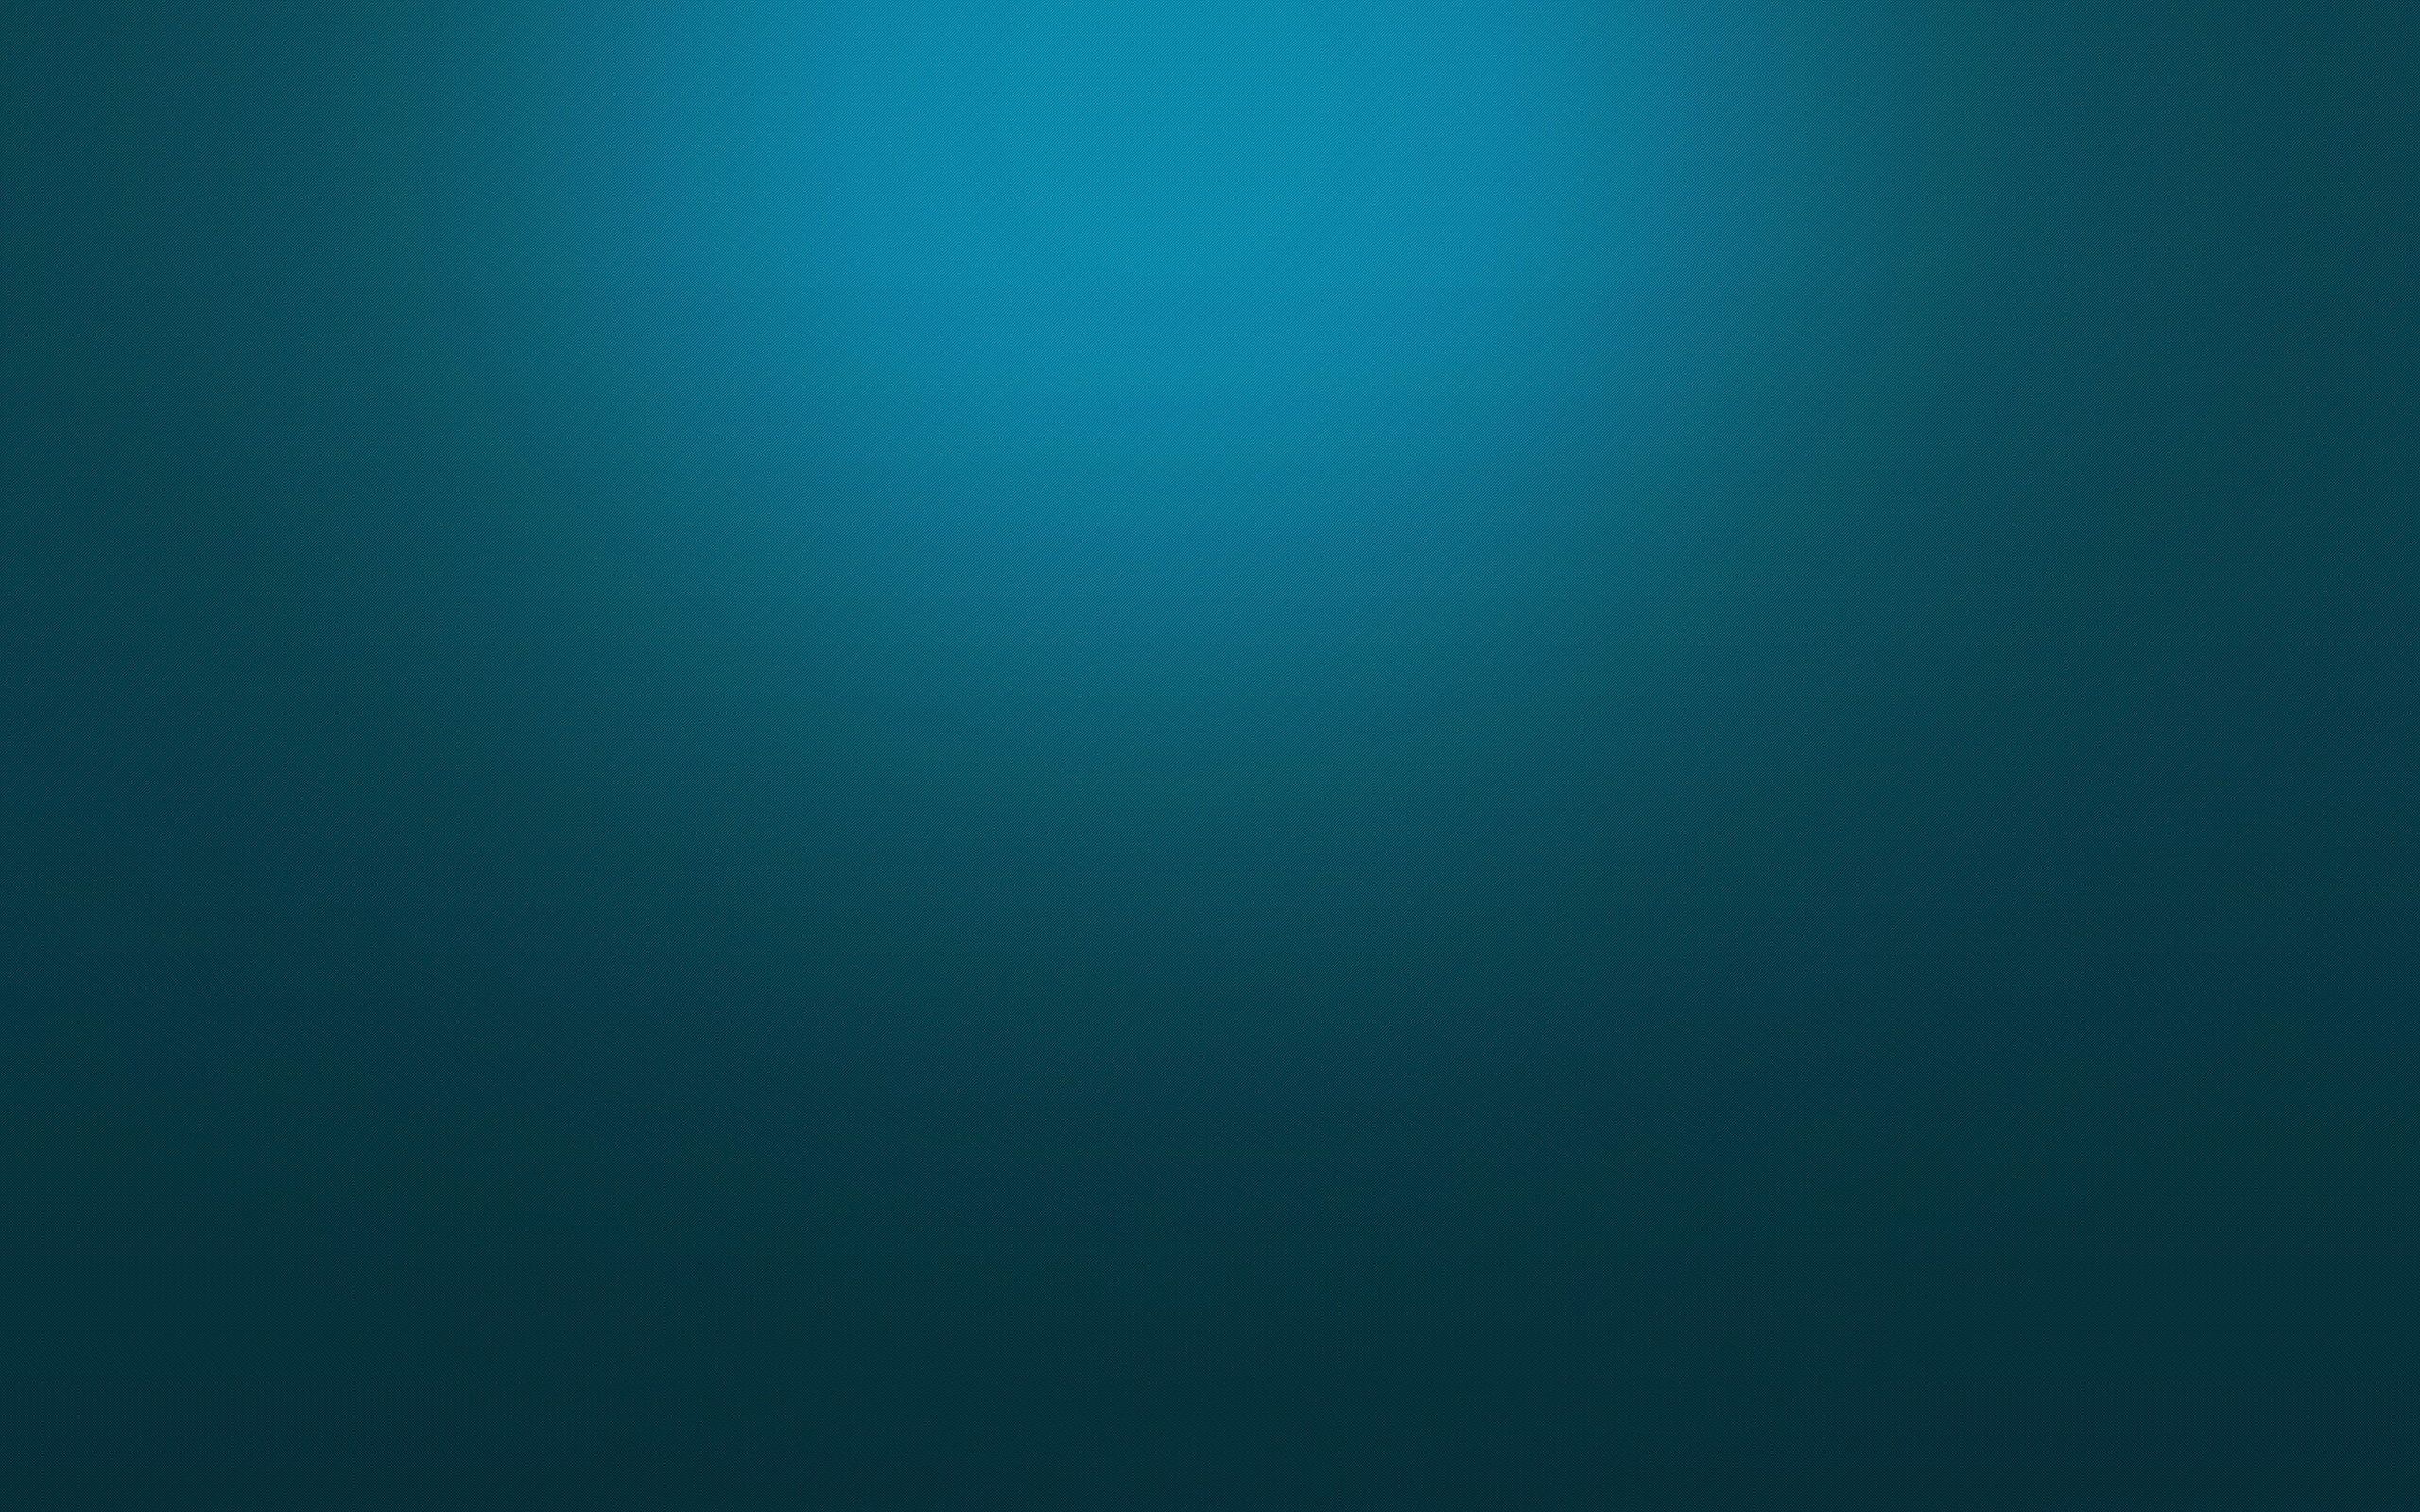 2 Cyan HD Wallpapers Backgrounds - Wallpaper Abyss